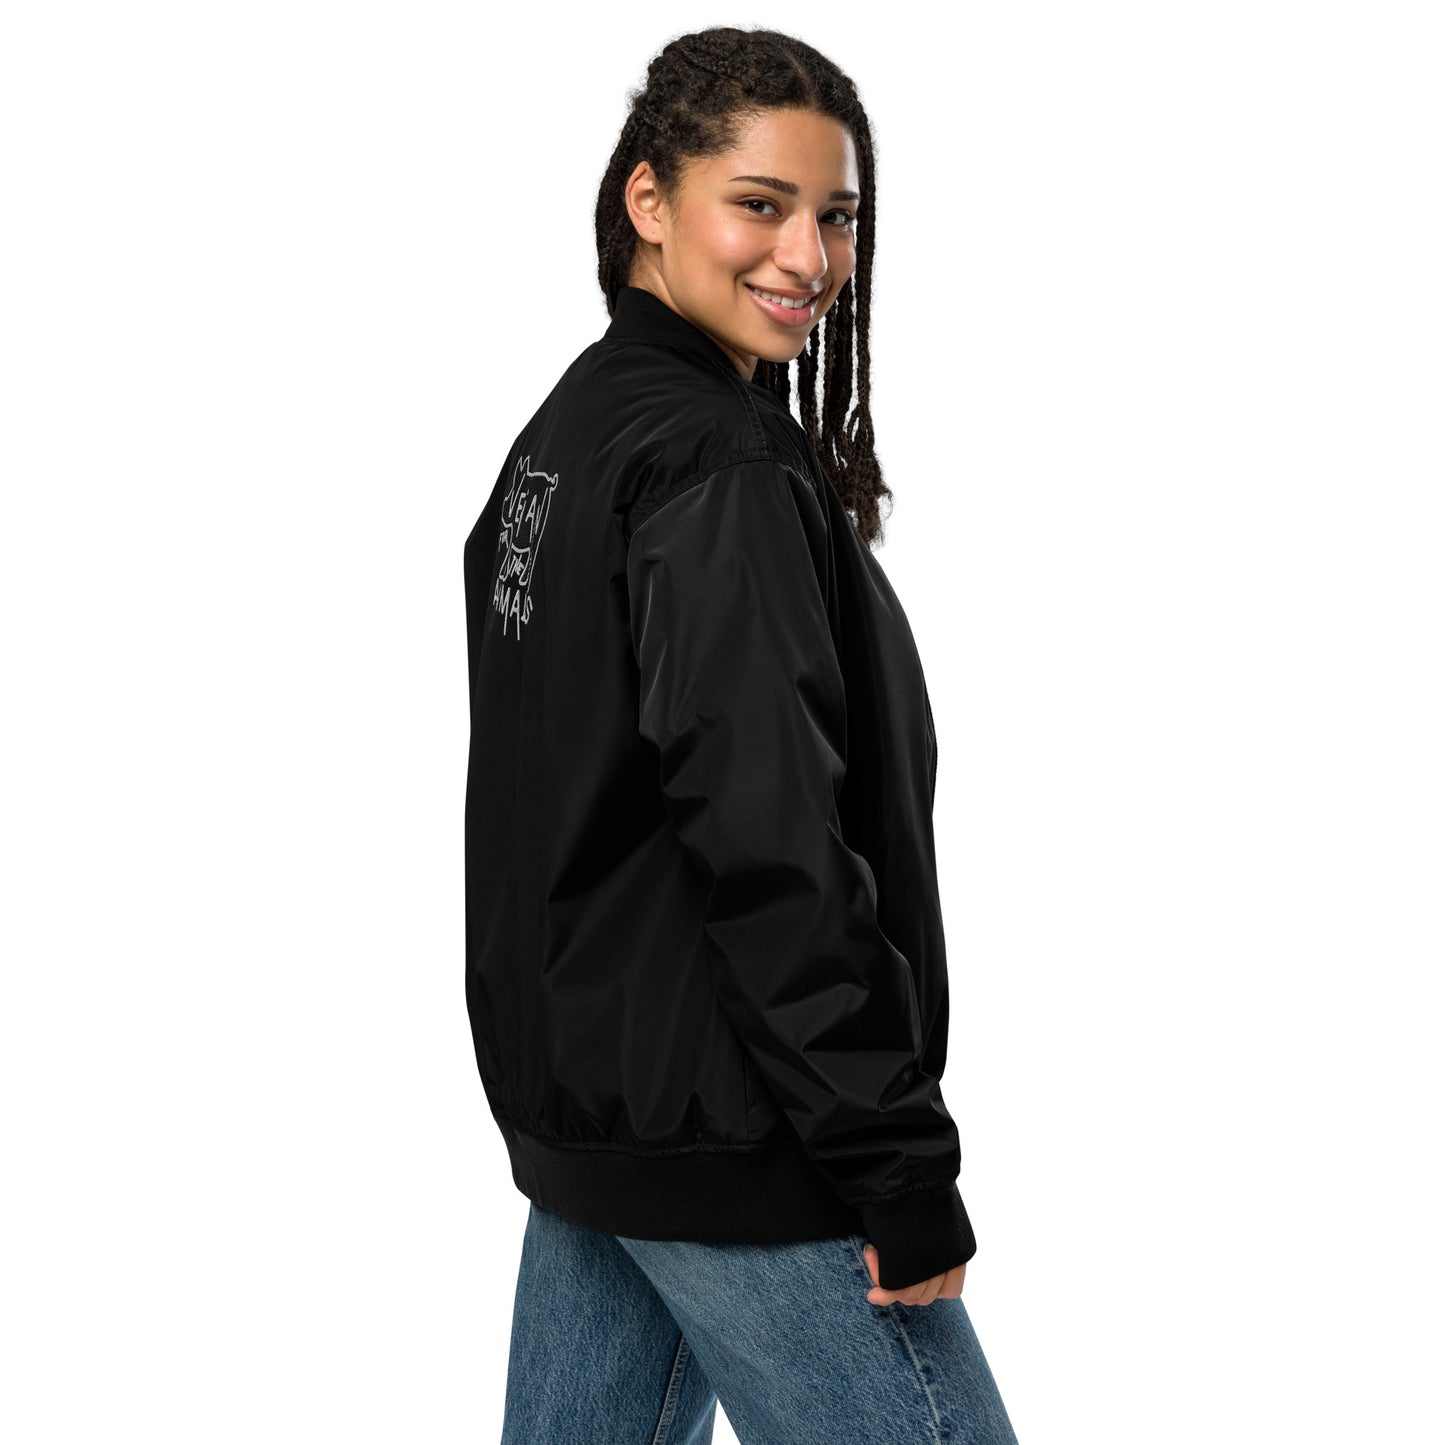 VEGAN FOR THE ANIMALS Premium Embroidered Recycled Bomber Jacket